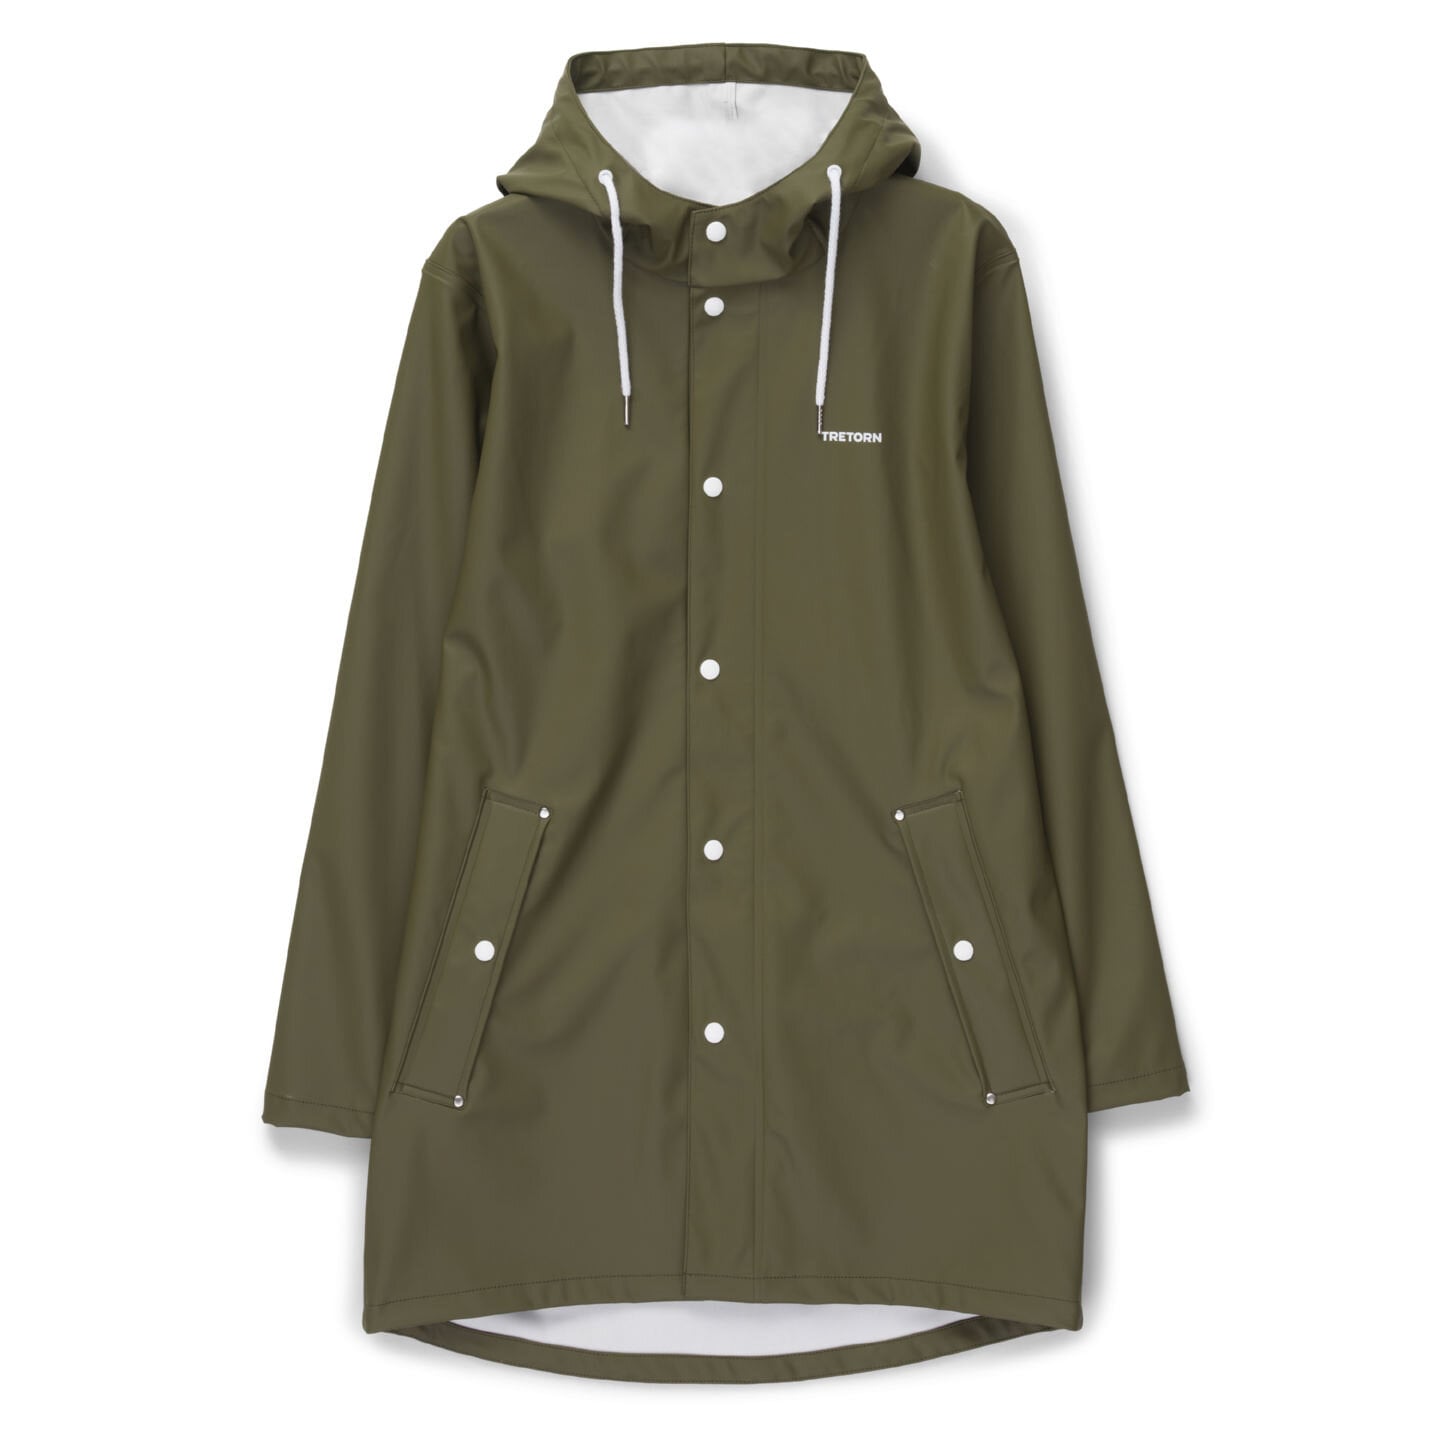 Wings rain jacket by Tretorn for men and women in the colour green